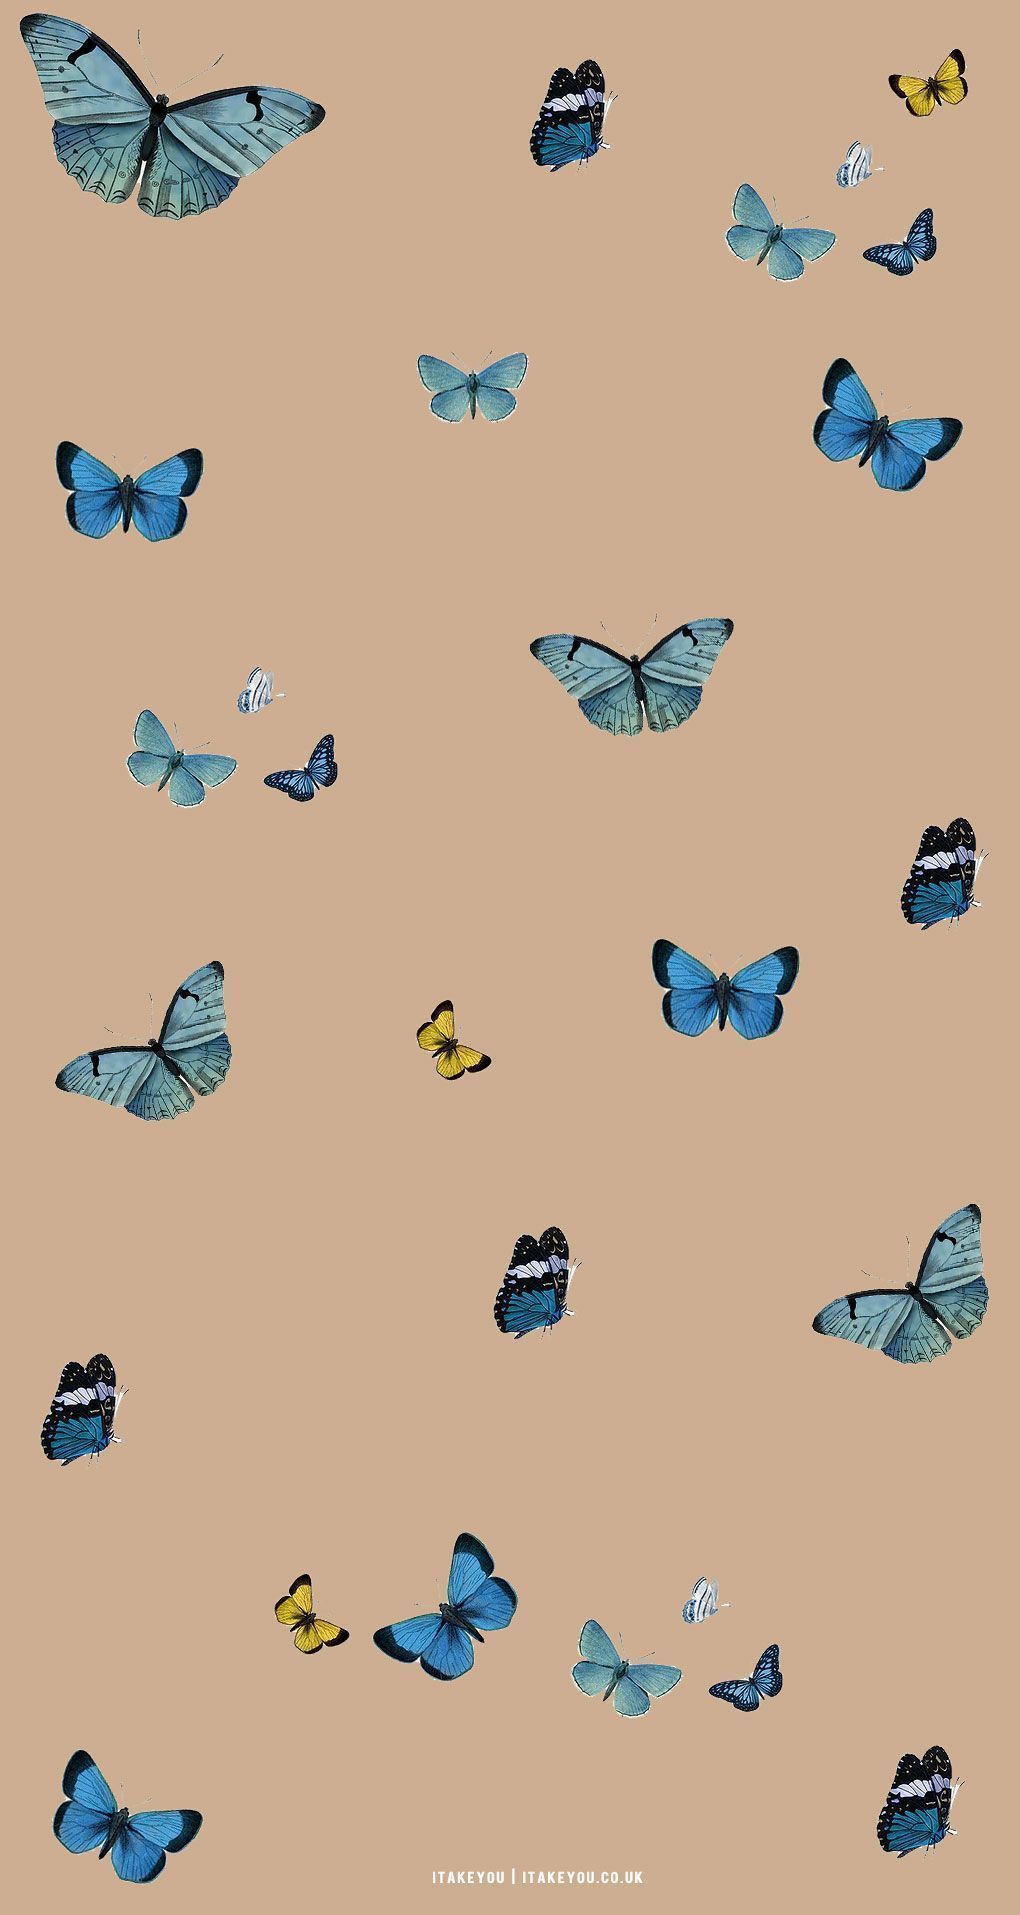 Cute Brown Aesthetic Wallpaper for Phone : Butterfly Assortment I Take You. Wedding Readings. Wedding Ideas